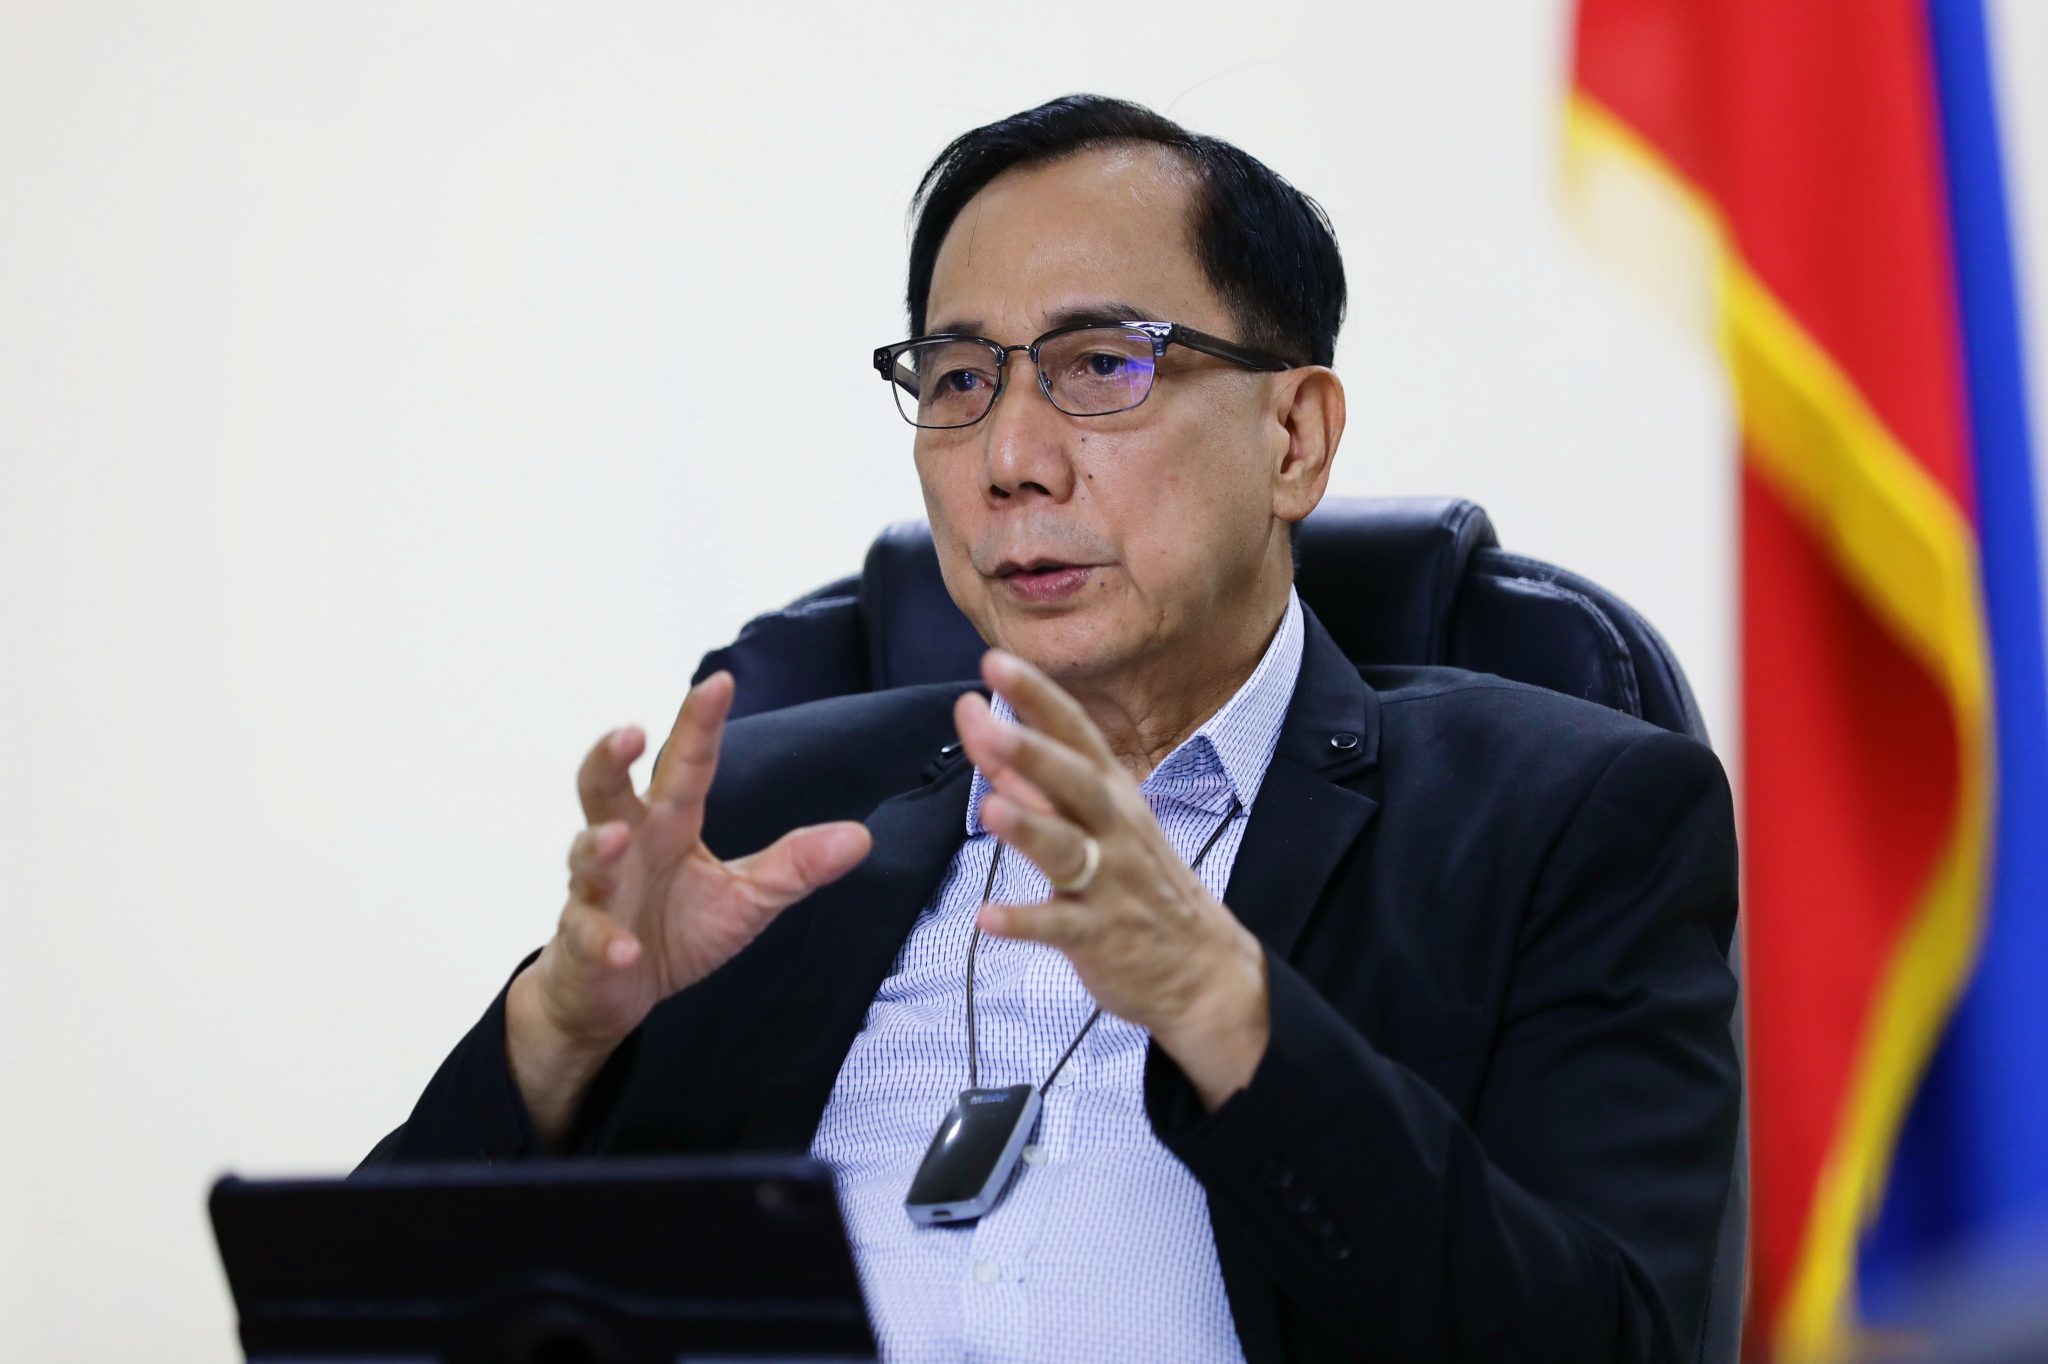 Agri chief calls on HEIs to help gov’t in economic recovery efforts